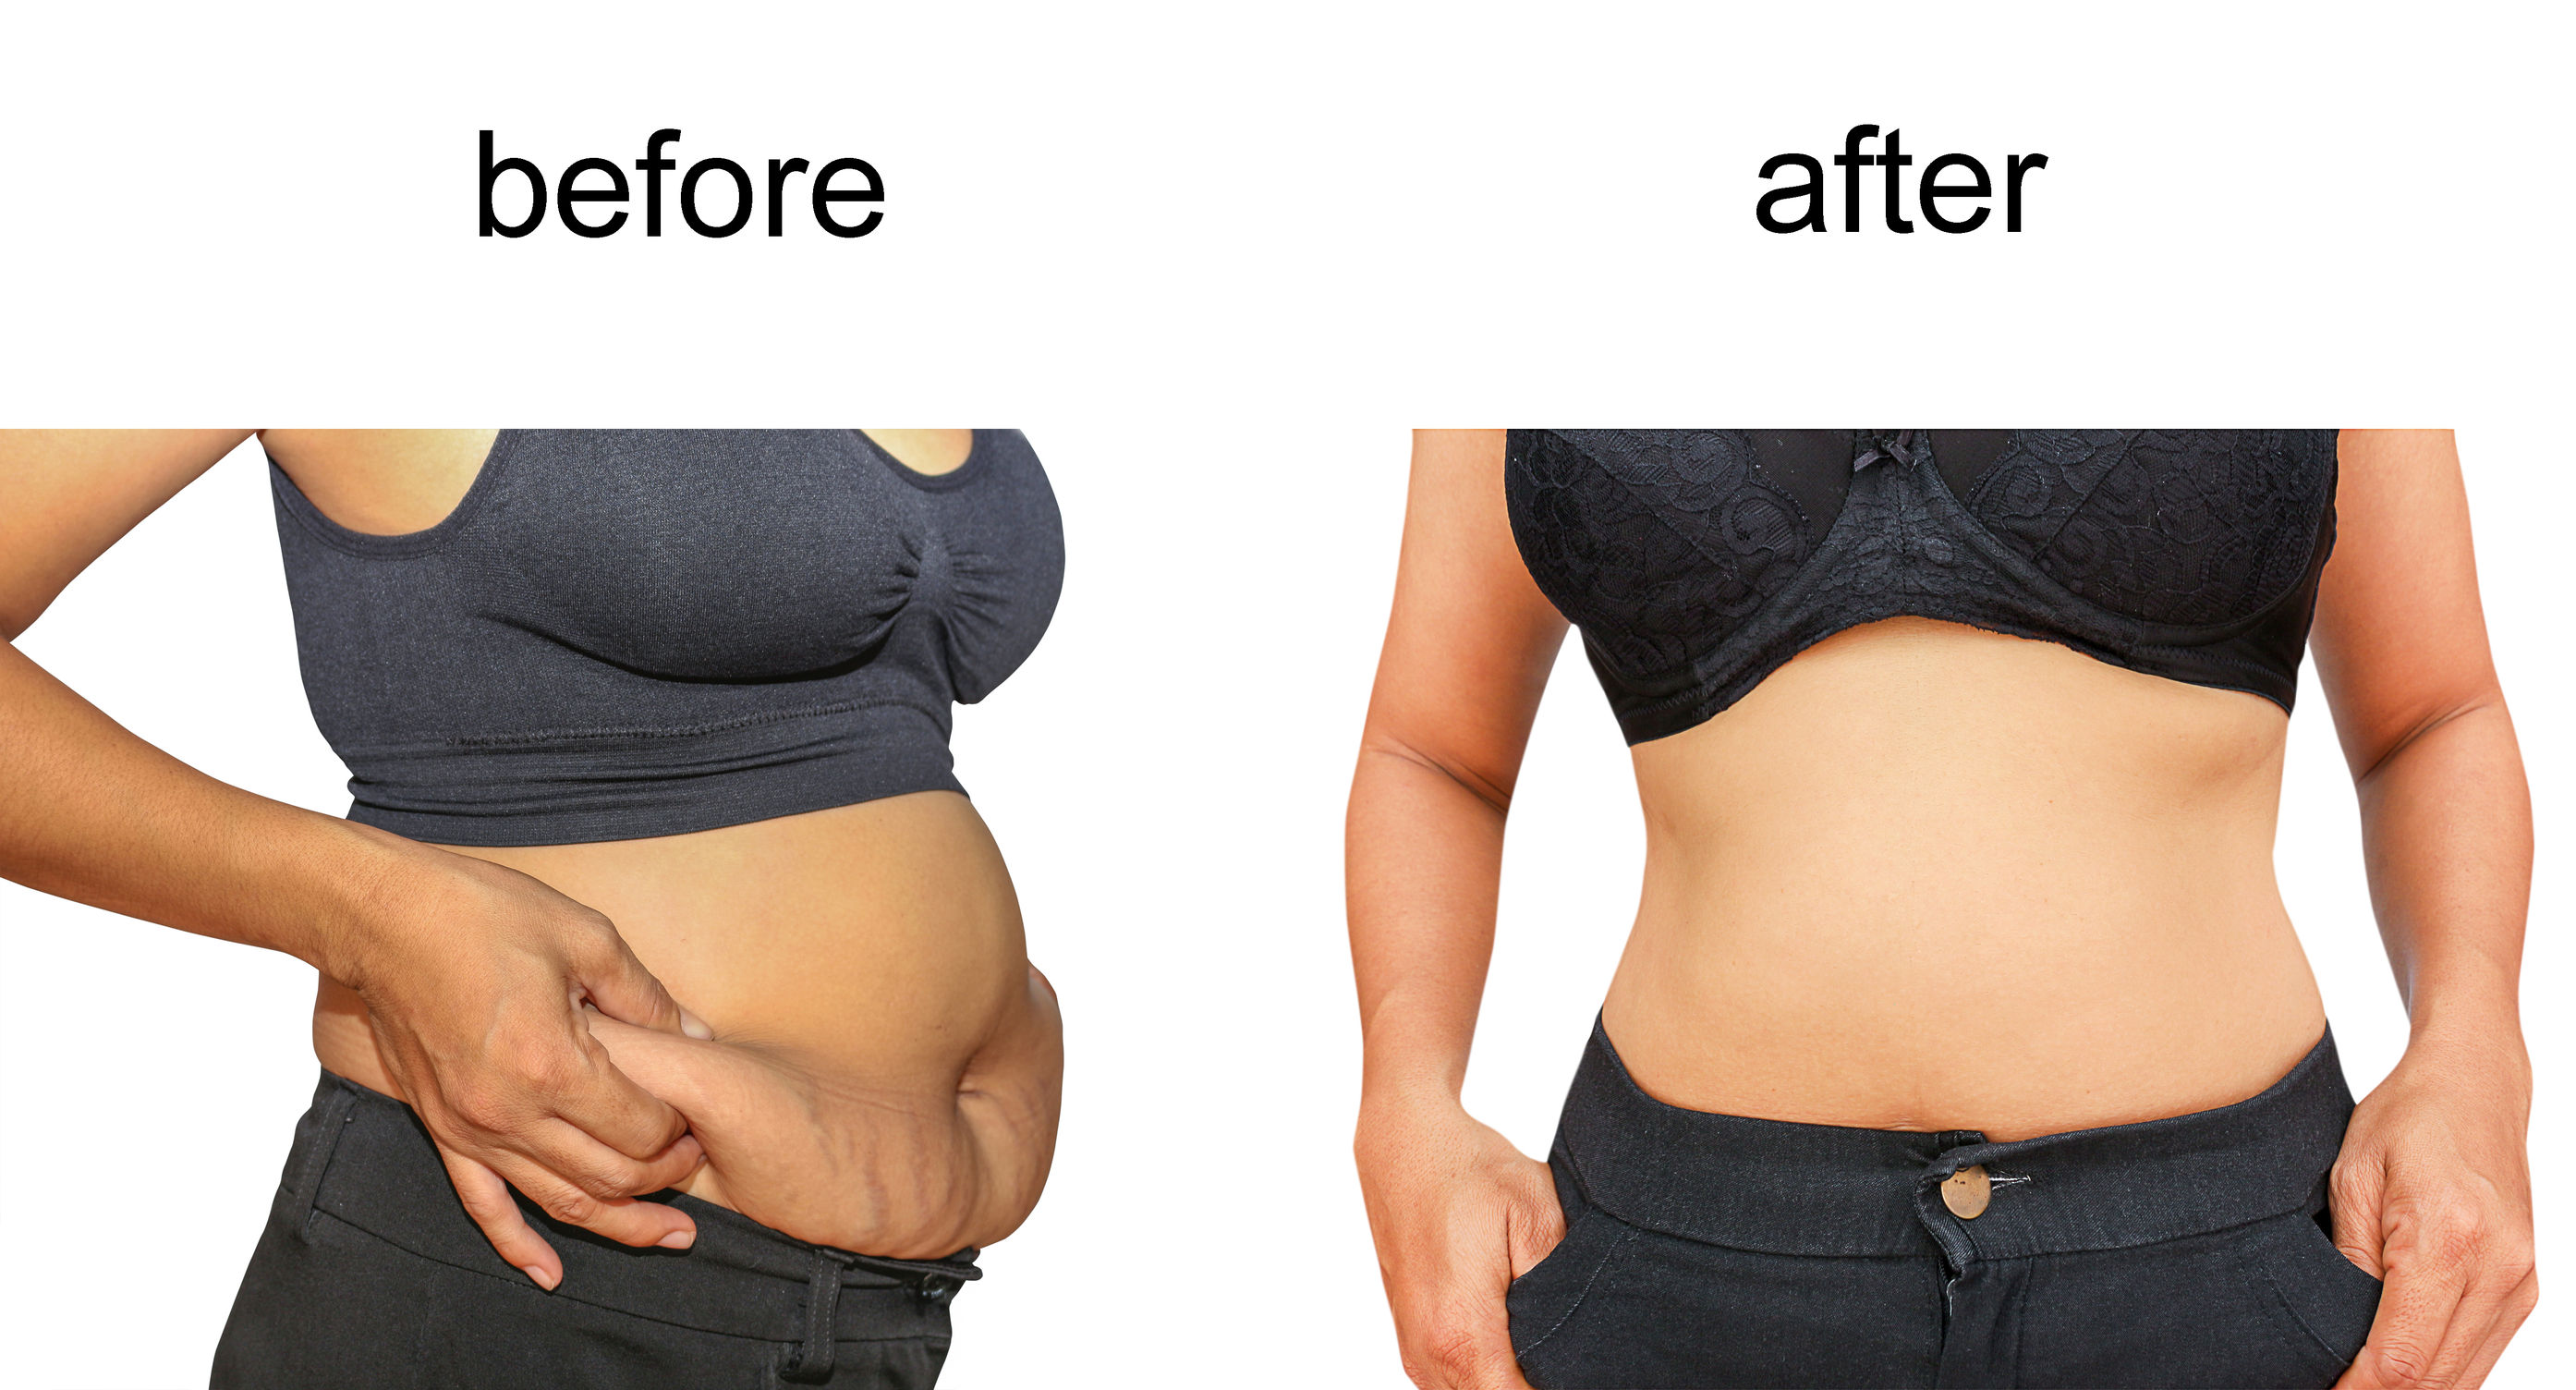 Liposuction in Orange County may be the Answer for Instant Fat Loss